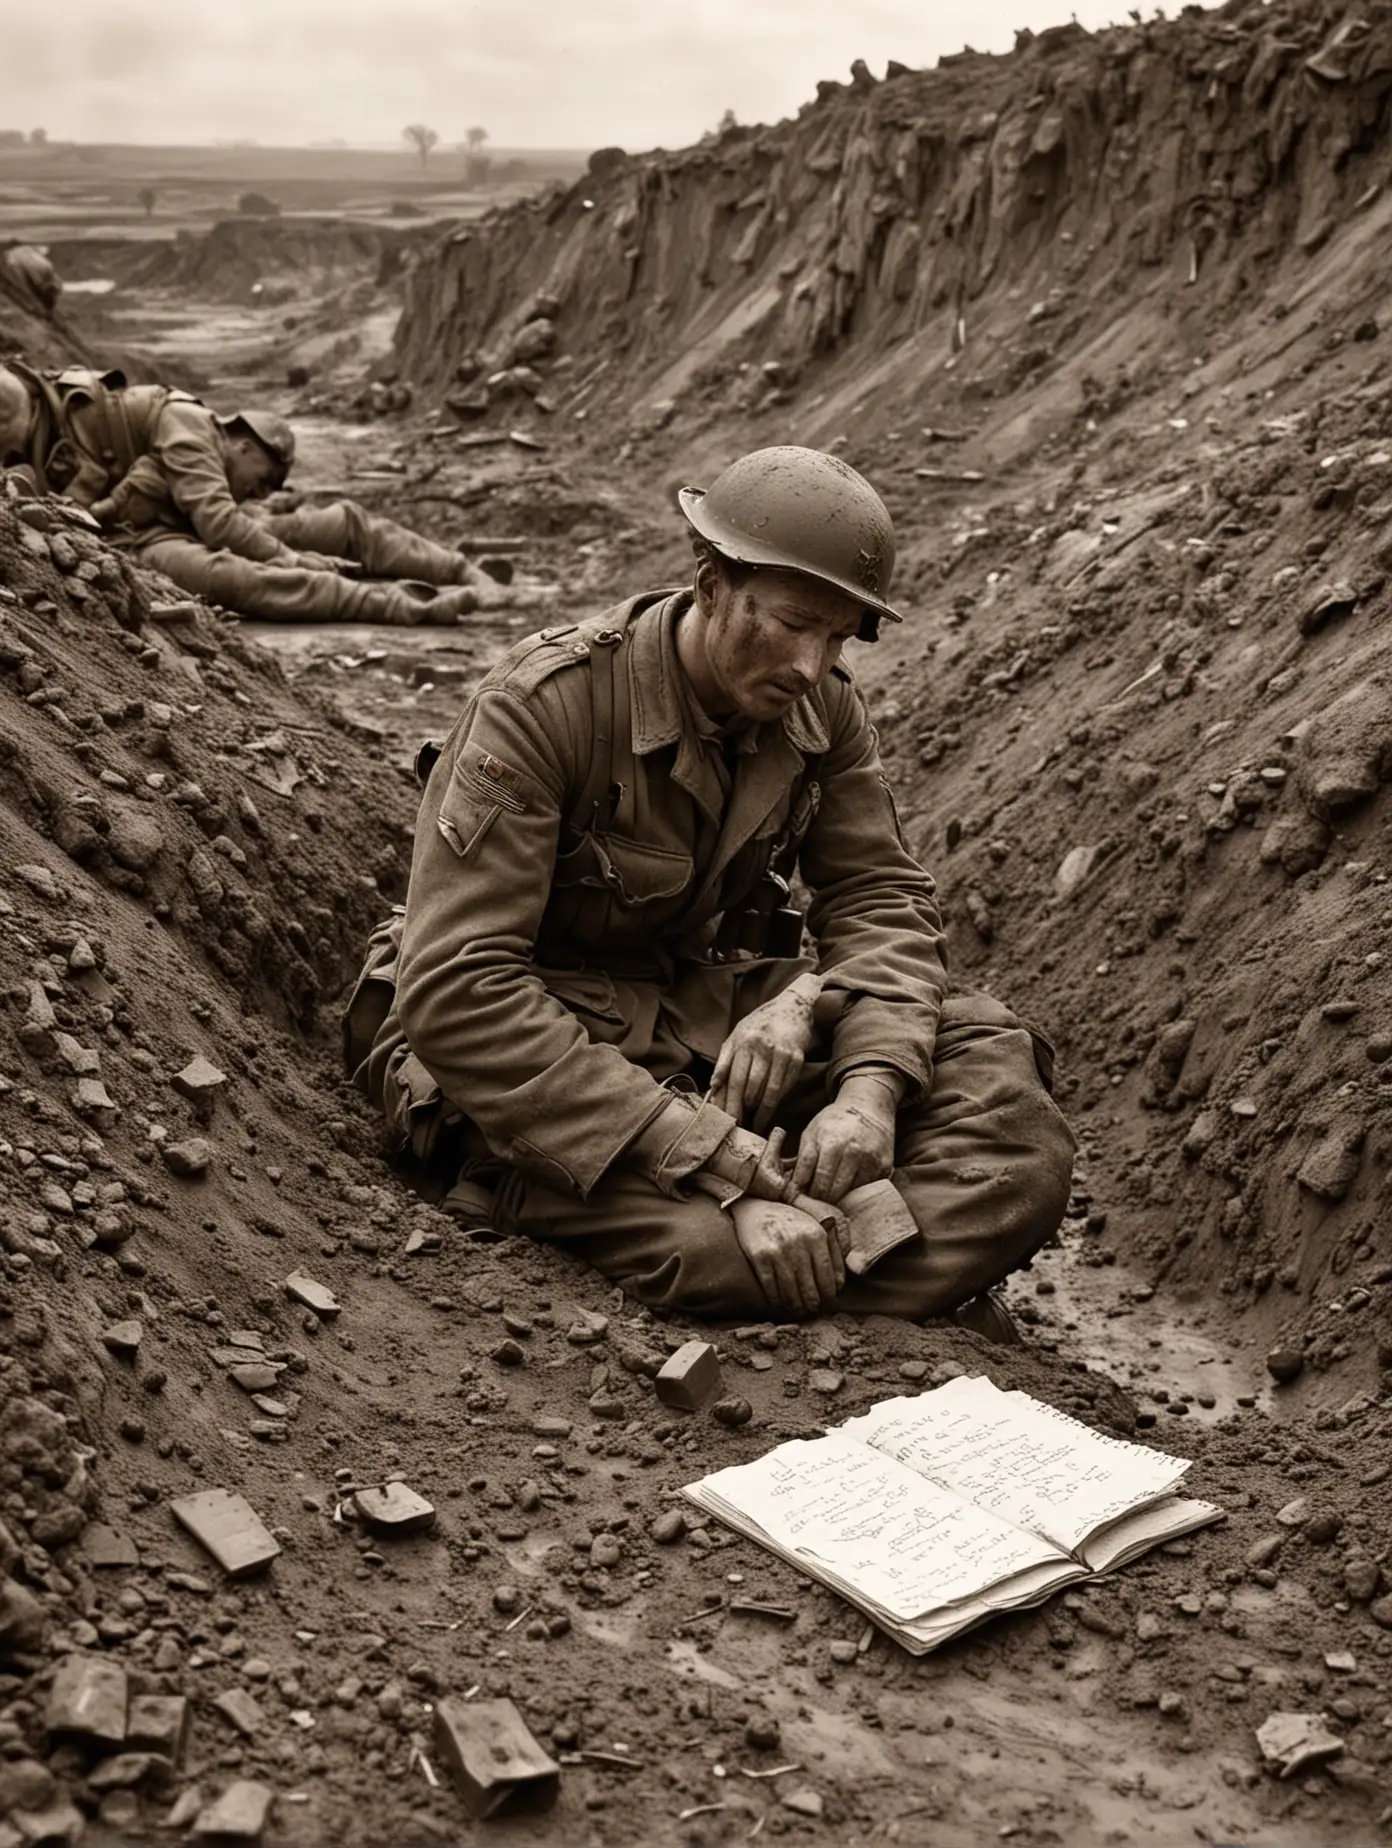 Wilfred-Owen-Soldier-Writing-Beside-Fallen-British-Comrade-in-Desolate-Bomb-Crater